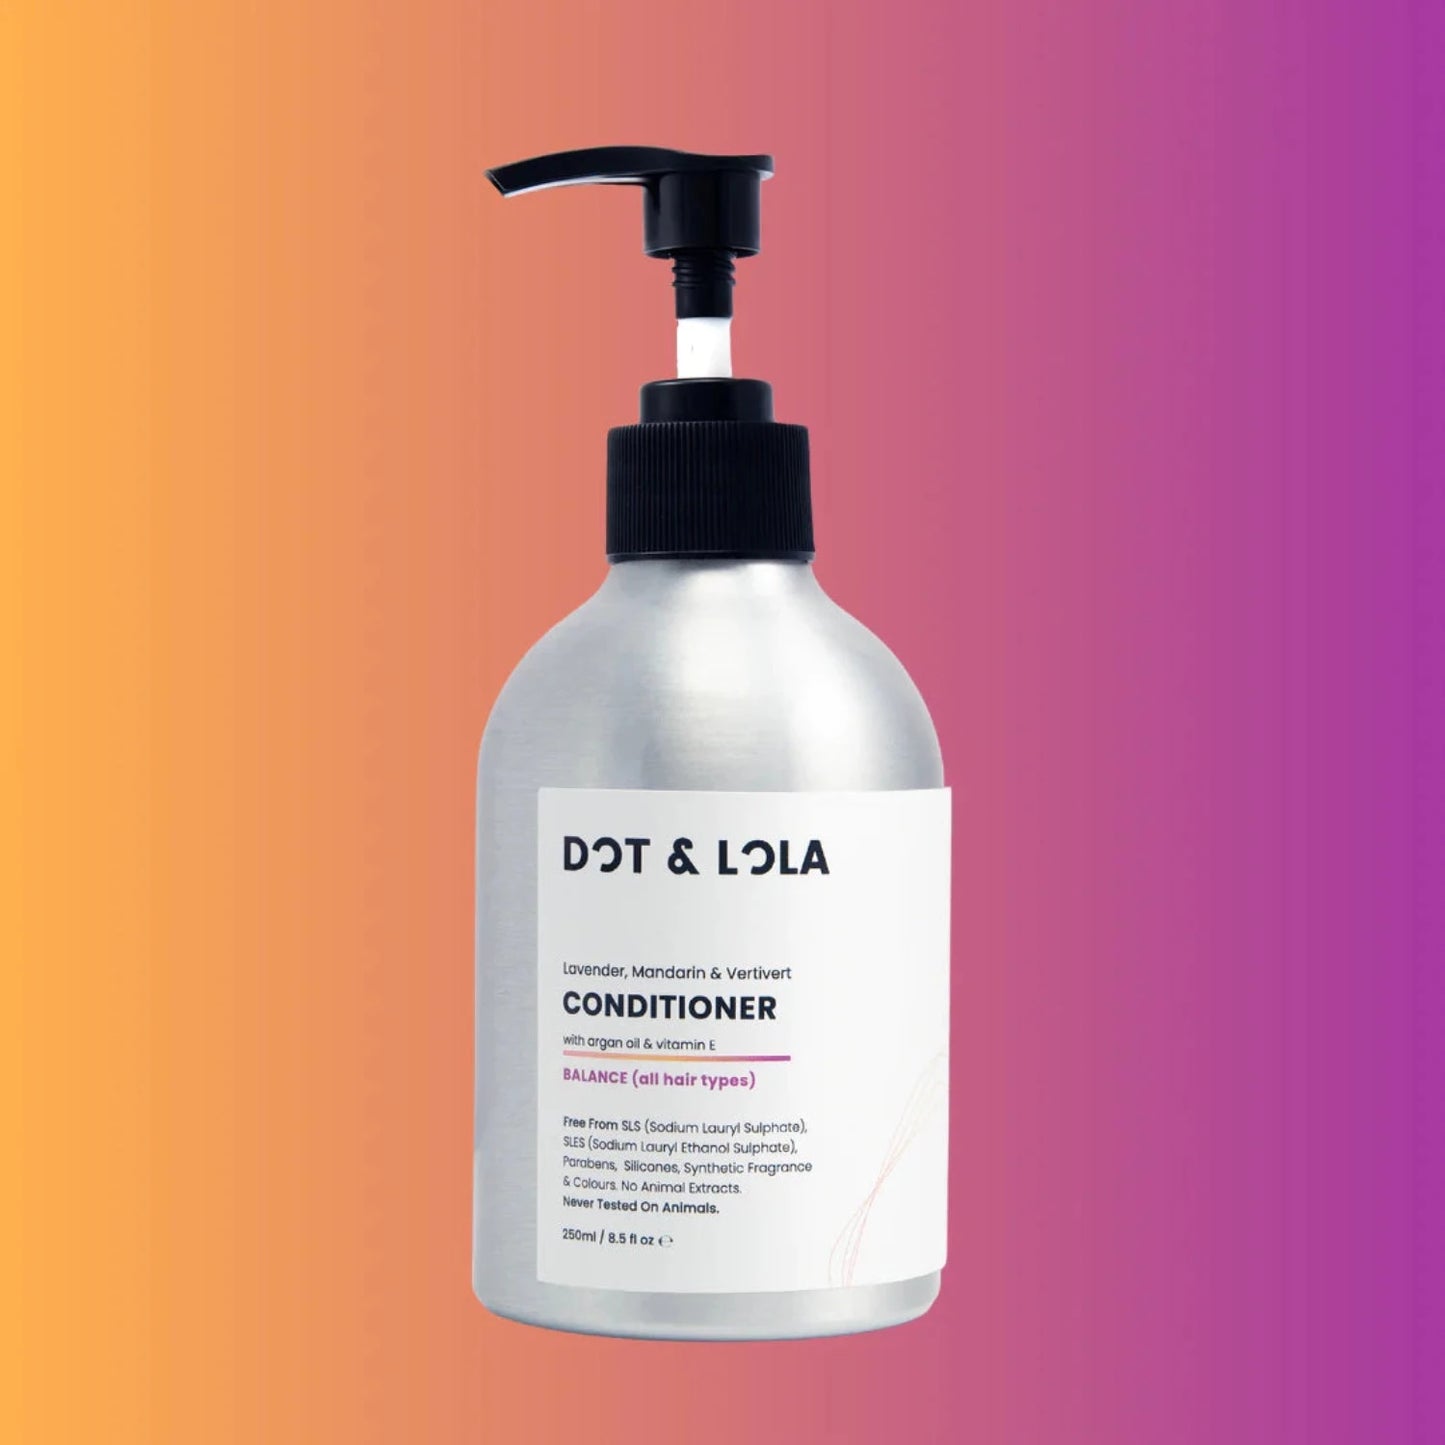 DOT & LOLA balance conditioner with additional argan oil and vitamin E, hair and scalp remain naturally healthy.